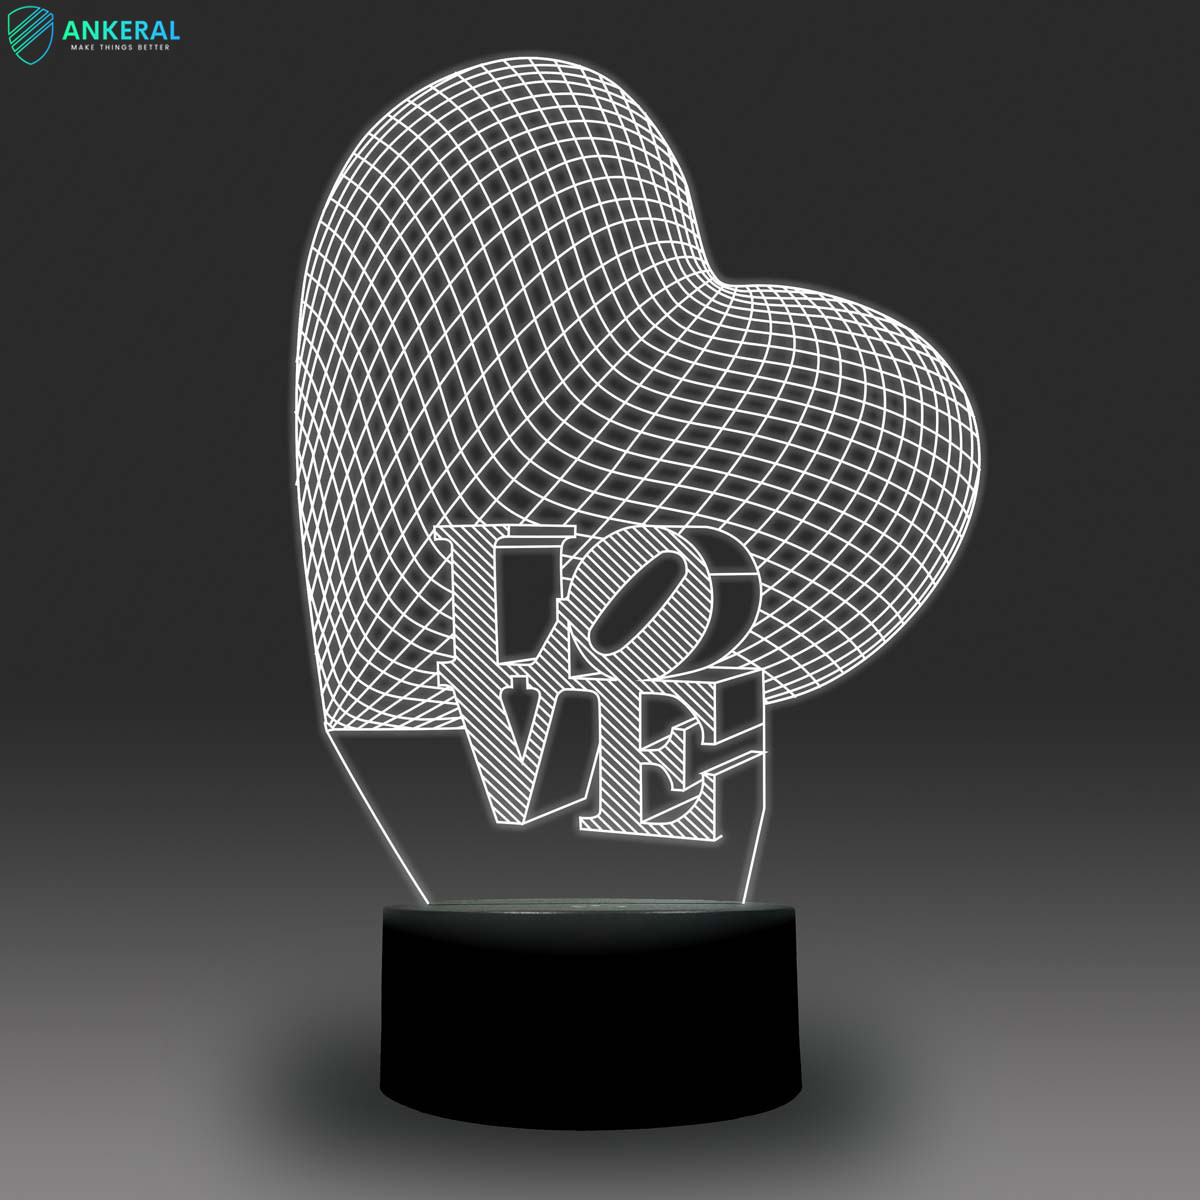 Wholesale Love Heart 3D Atmosphere Night Light Fantastic Creative New Designs from china suppliers